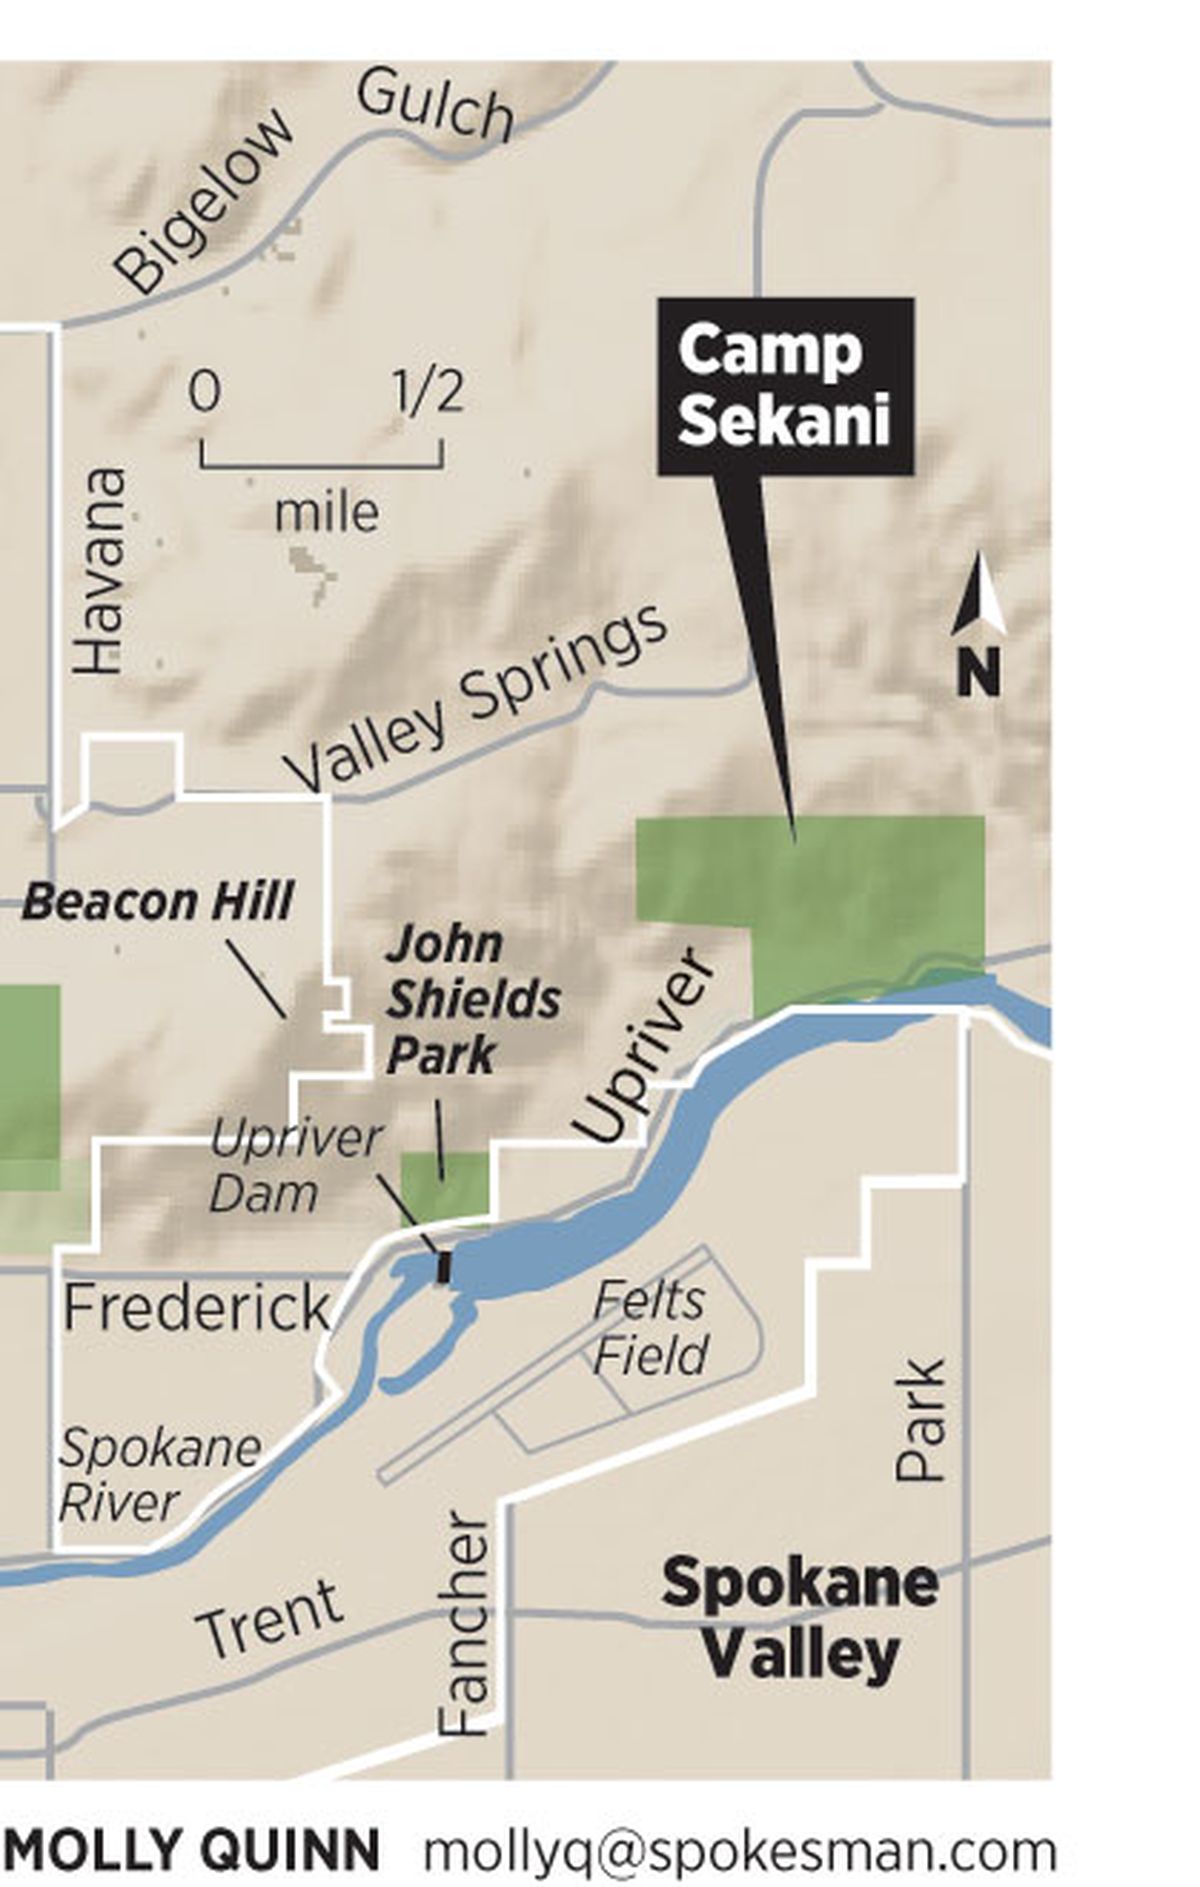 Camp Sekani is managed by the Spokane Parks and Recreation Department, featuring mountain biking trails and disc golf.